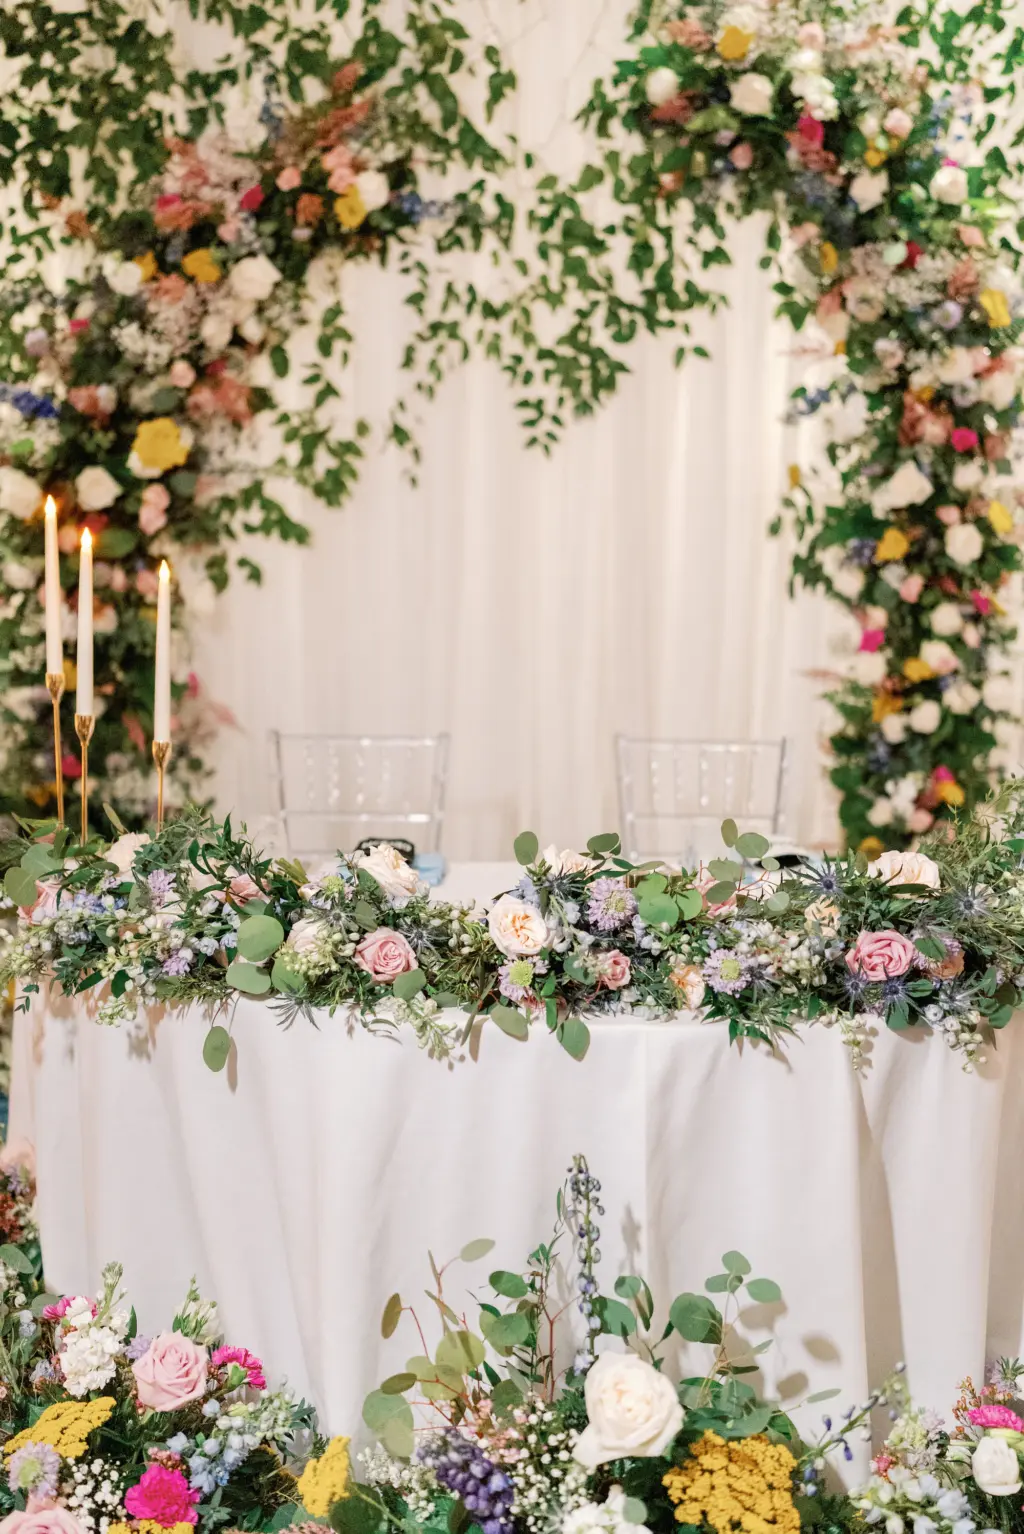 Whimsical Sweetheart Table with Colorful Backdrop | Pink Roses, Baby's Breath, and Greenery Table Garland Ideas | Clearwater Florist Lemon Drops Weddings and Events